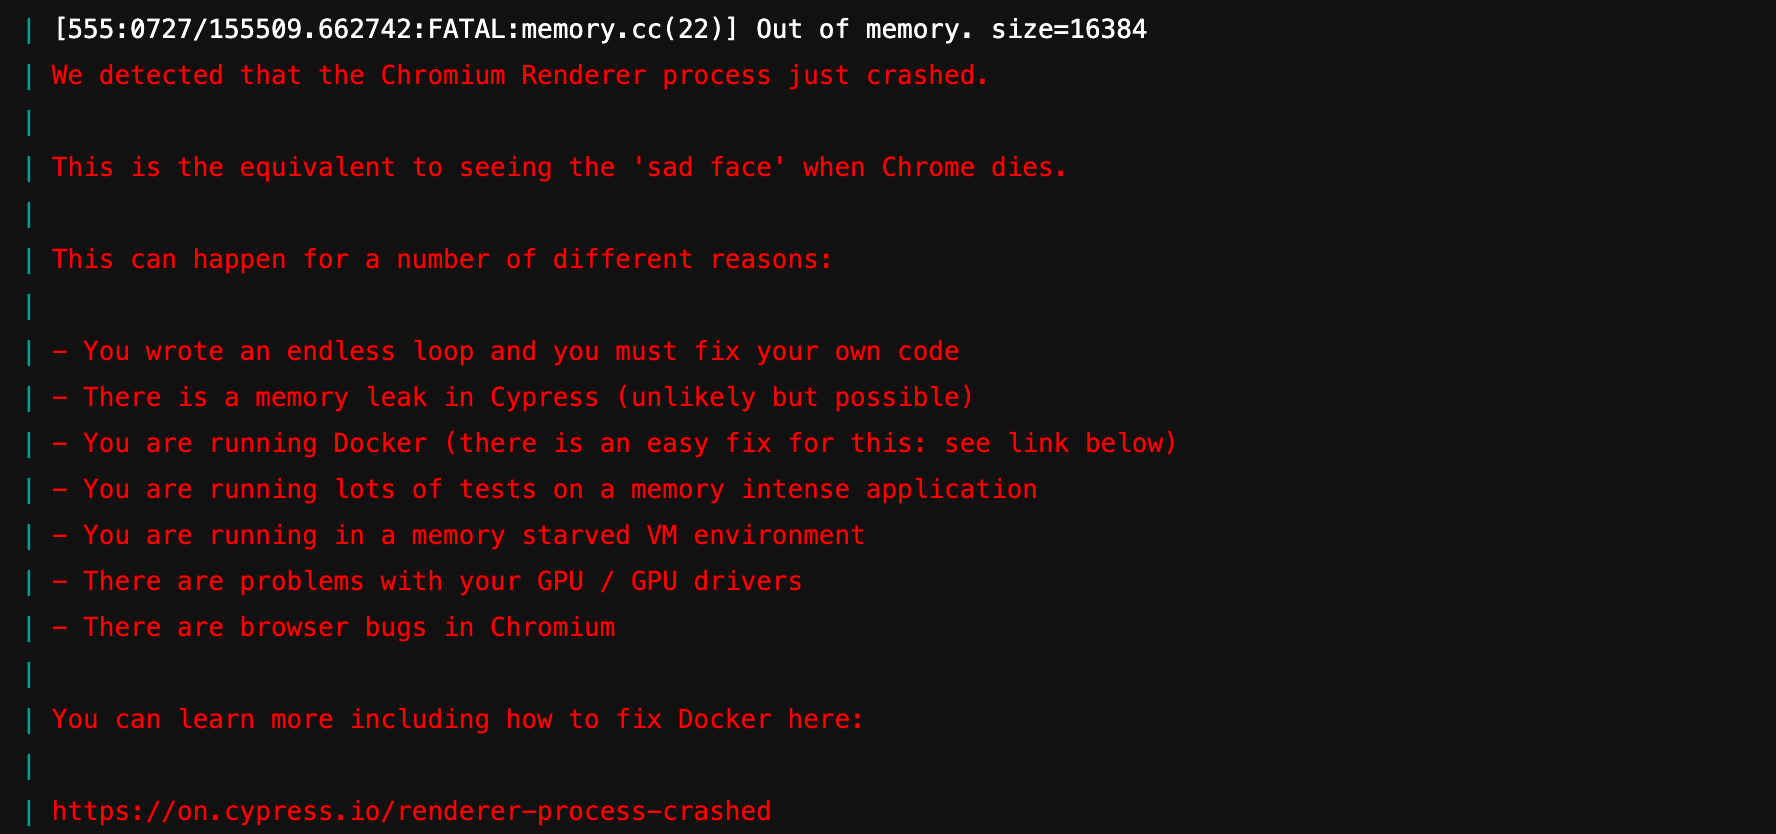 cypress crashing due to out of memory